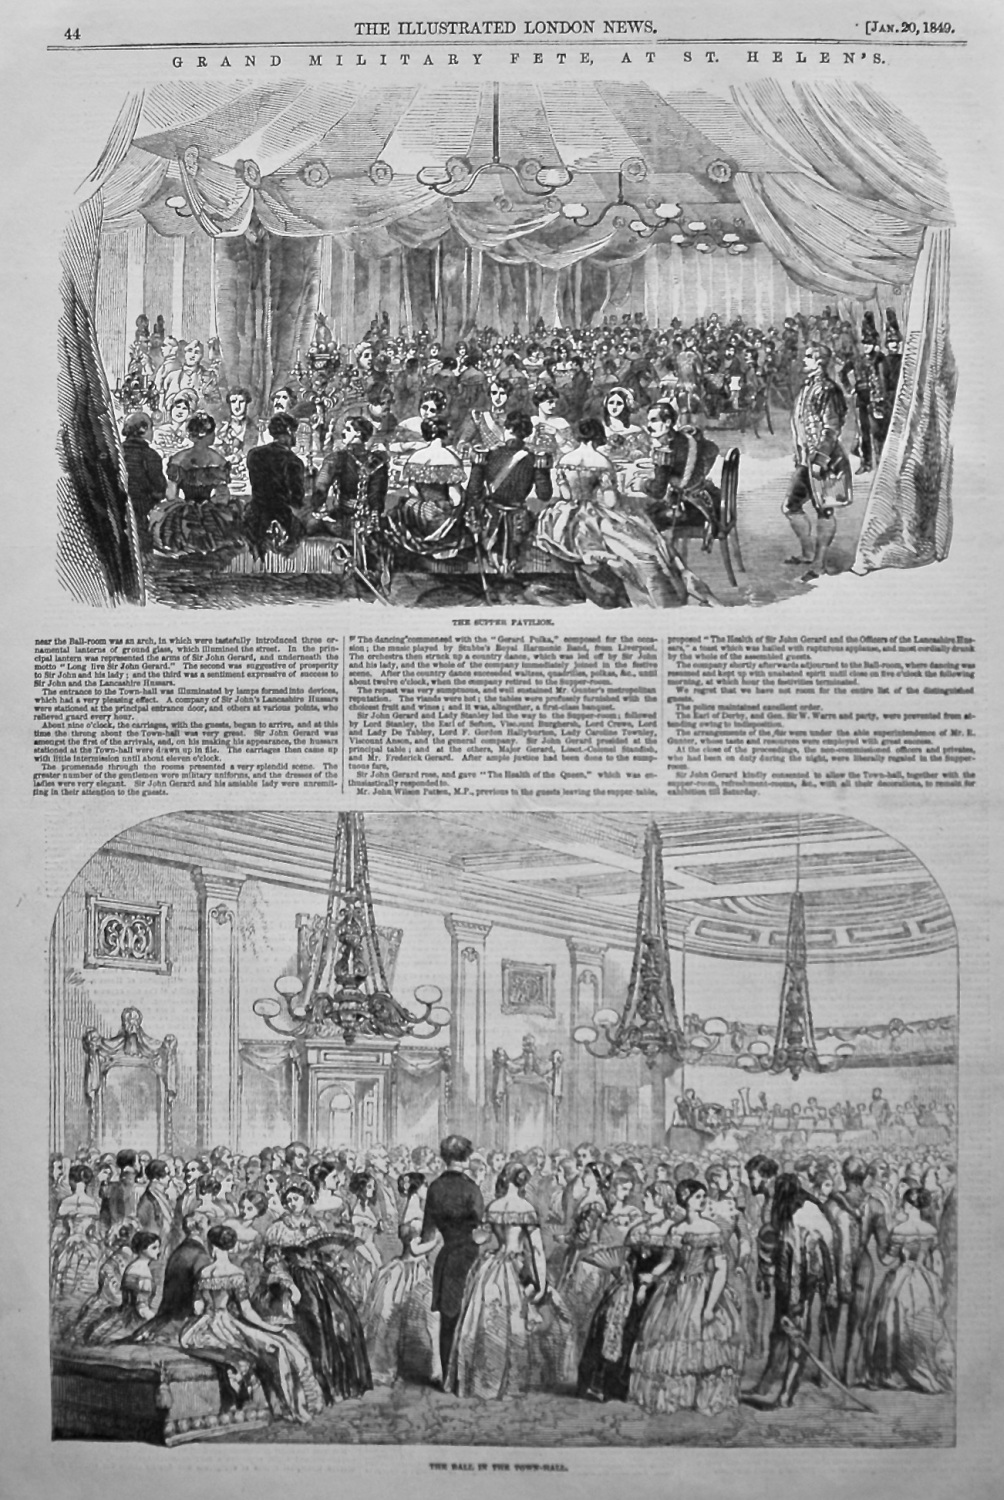 Grand Military Fete, at St. Helen's. 1849.